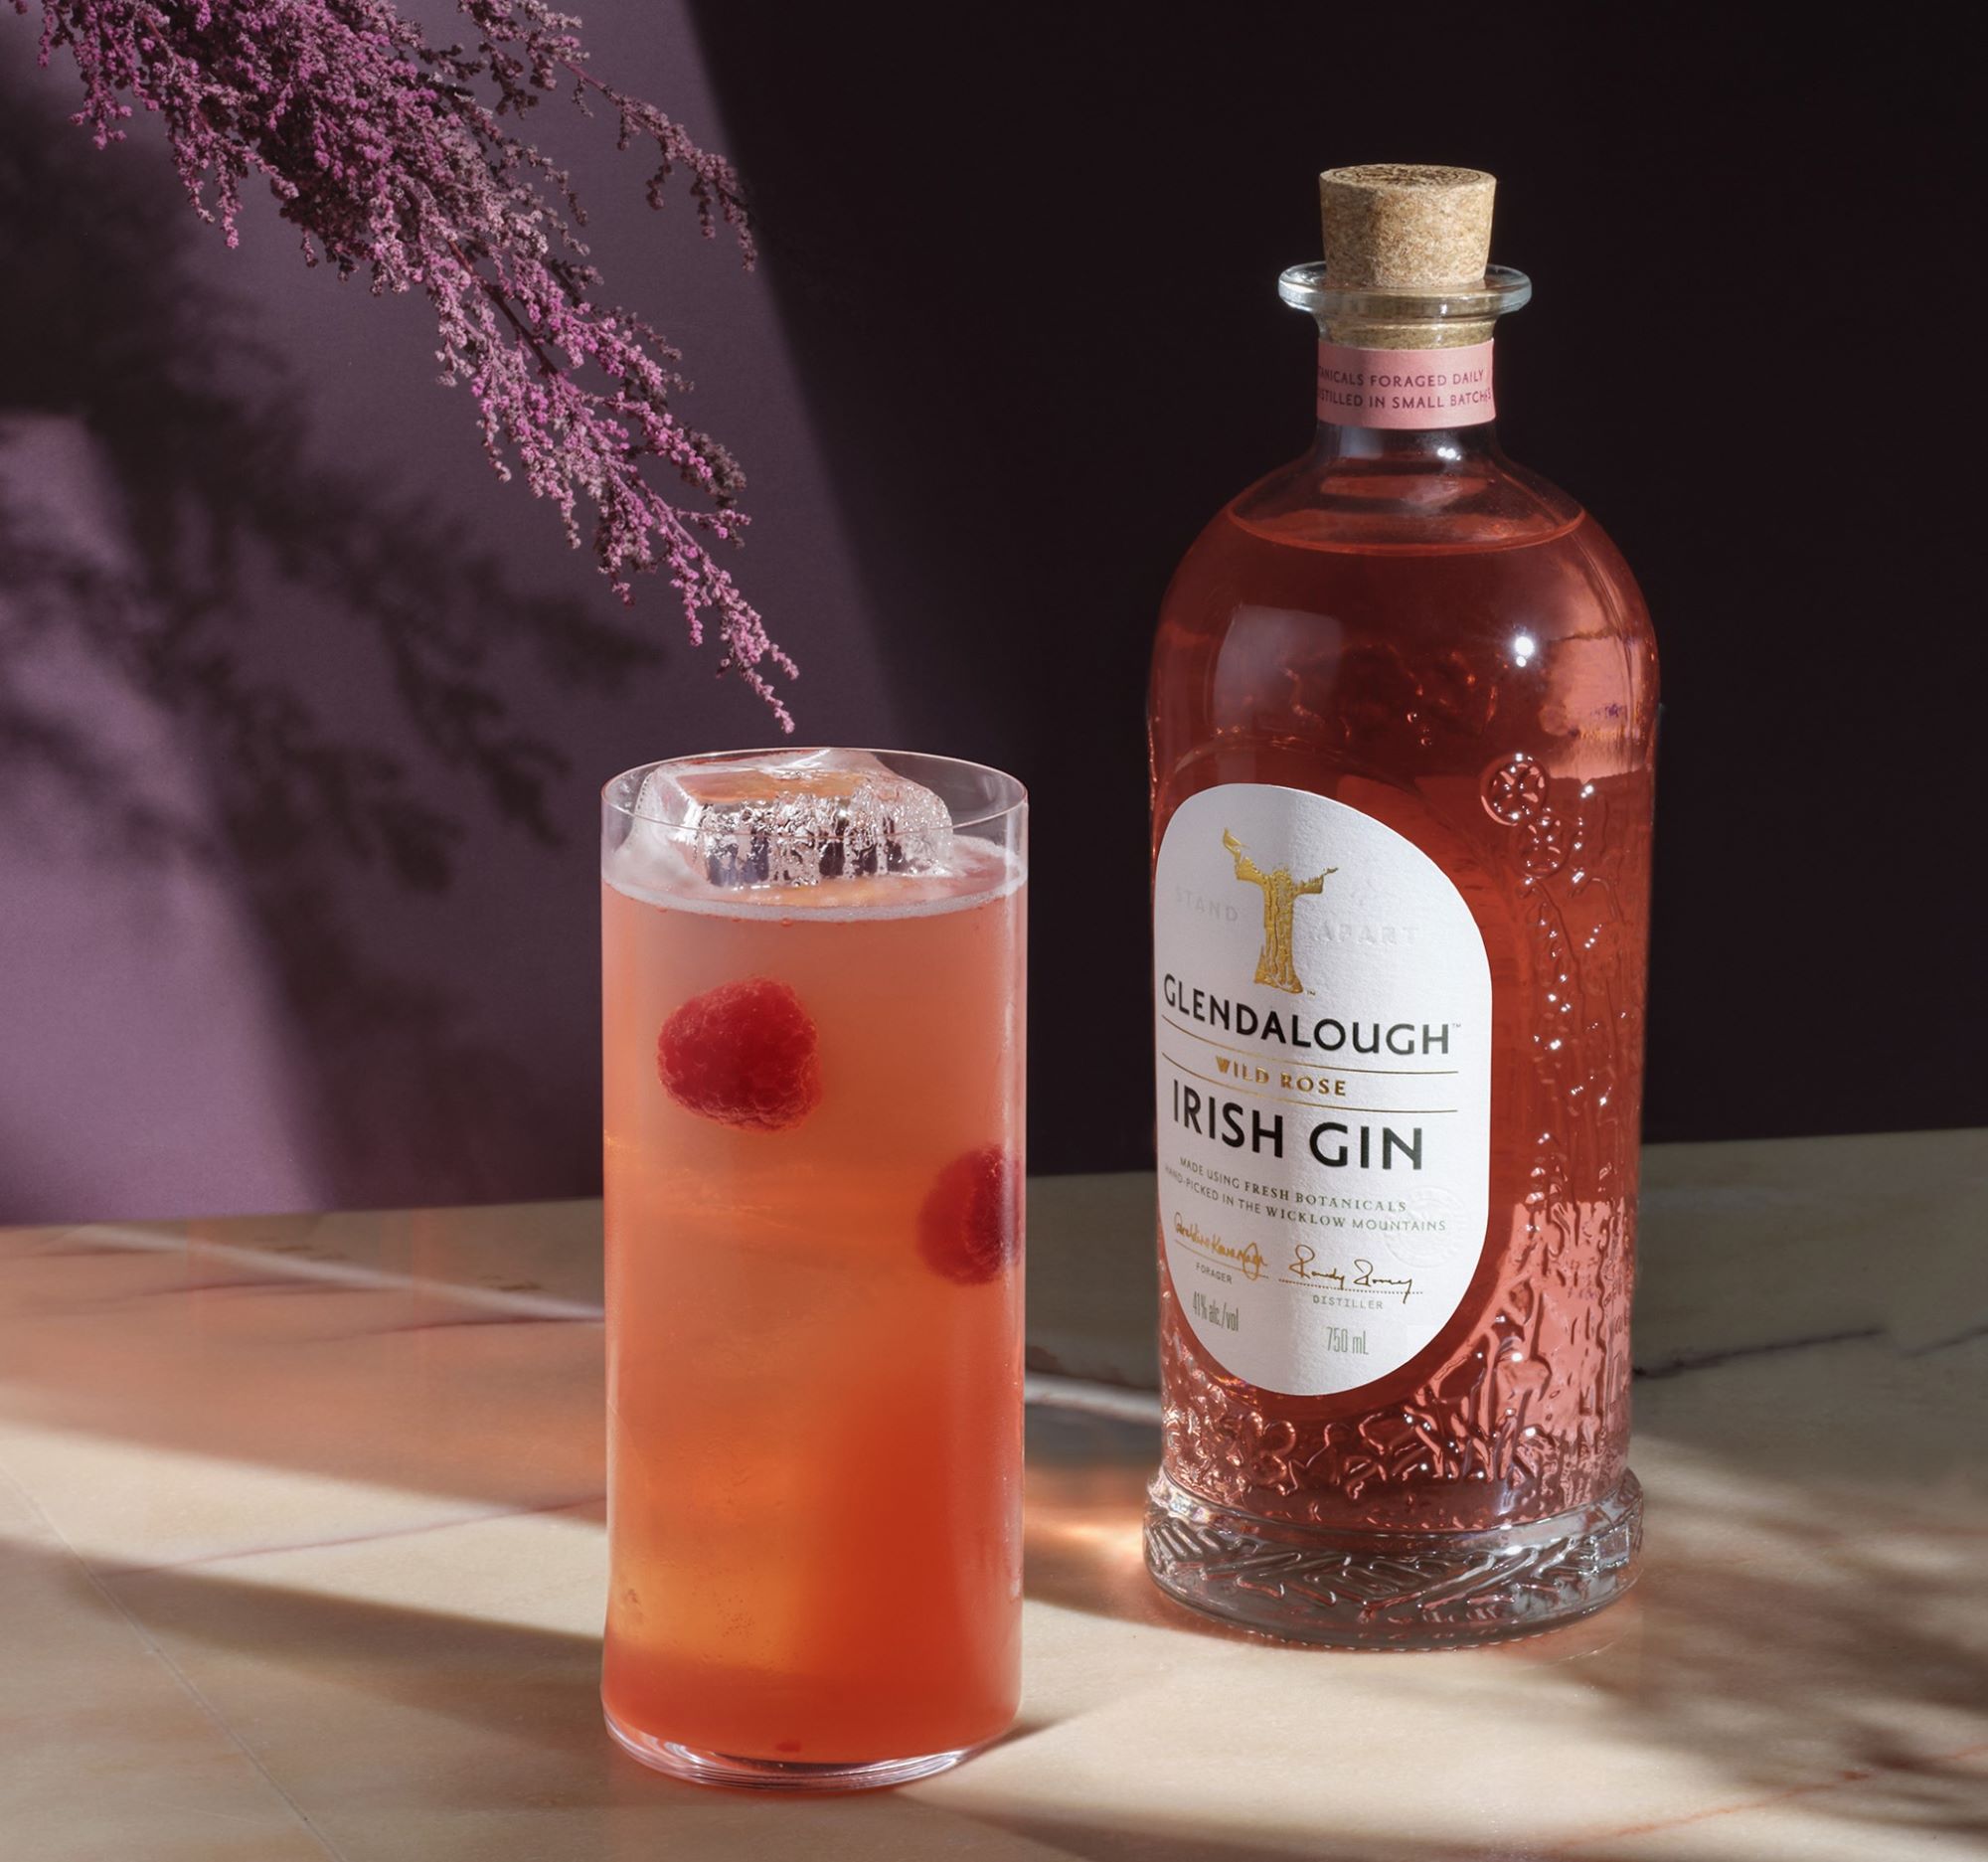 Swap the Typical Pink Roses for Glendalough Rose Gin this V-Day